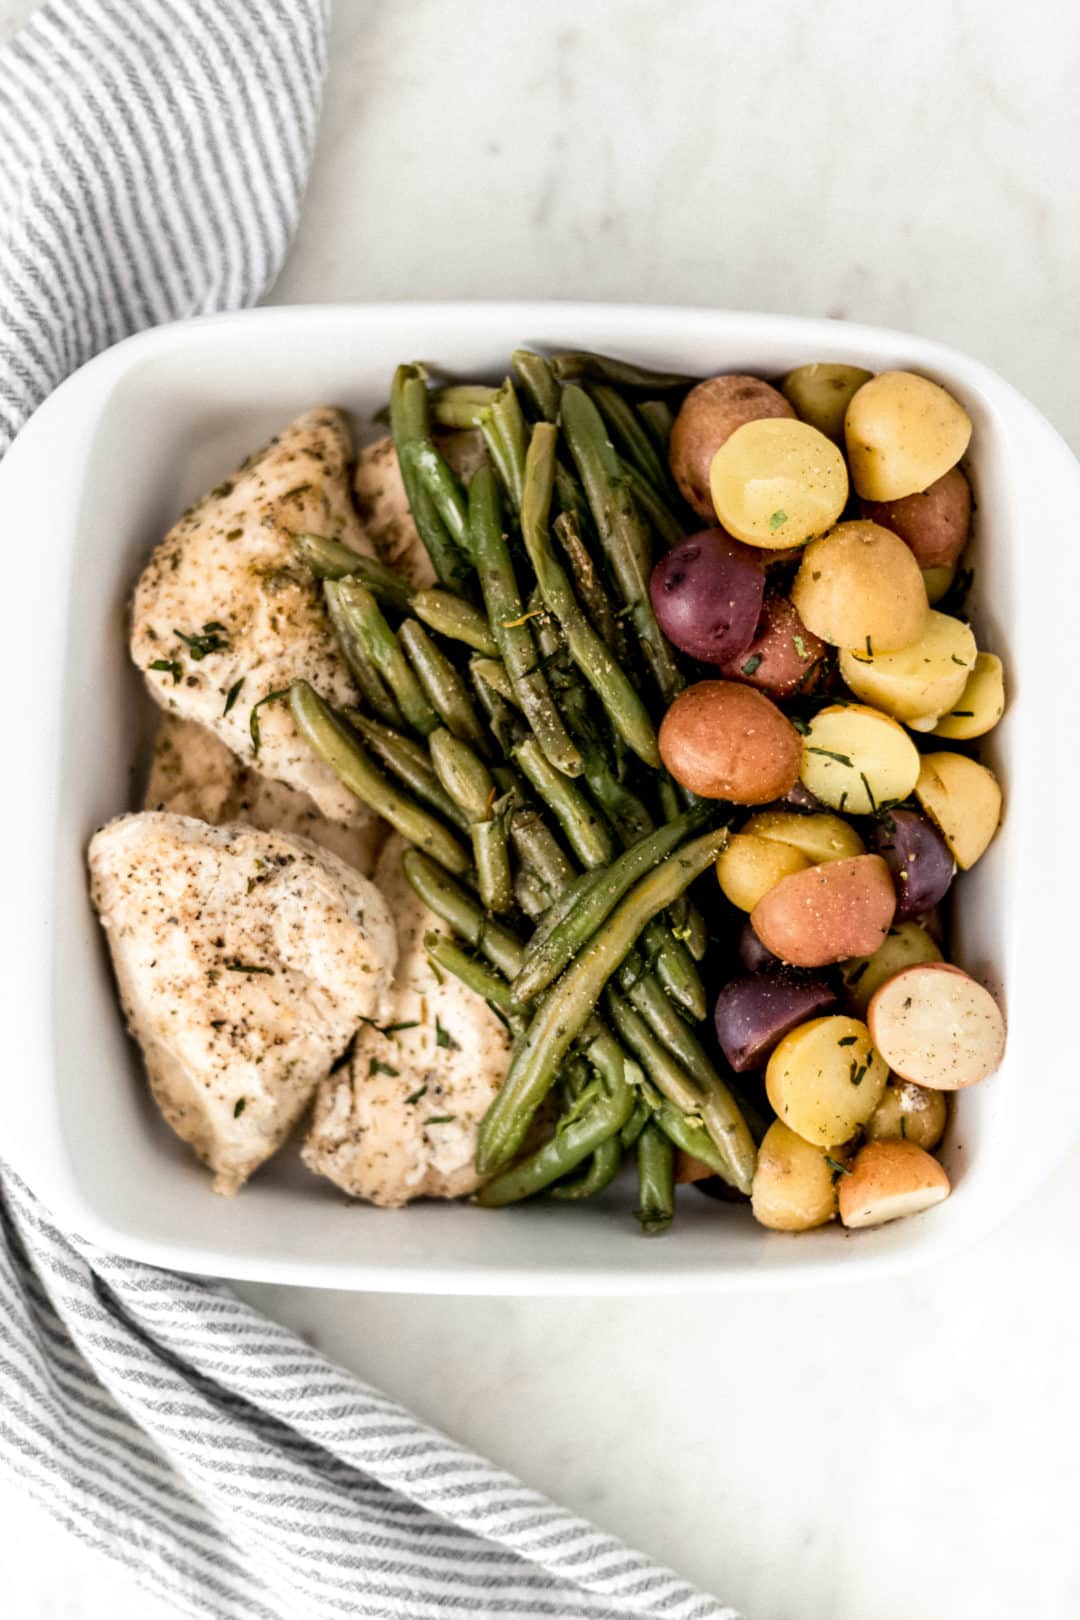 Instant Pot Chicken And Potatoes With Green Beans,Veiled Chameleons